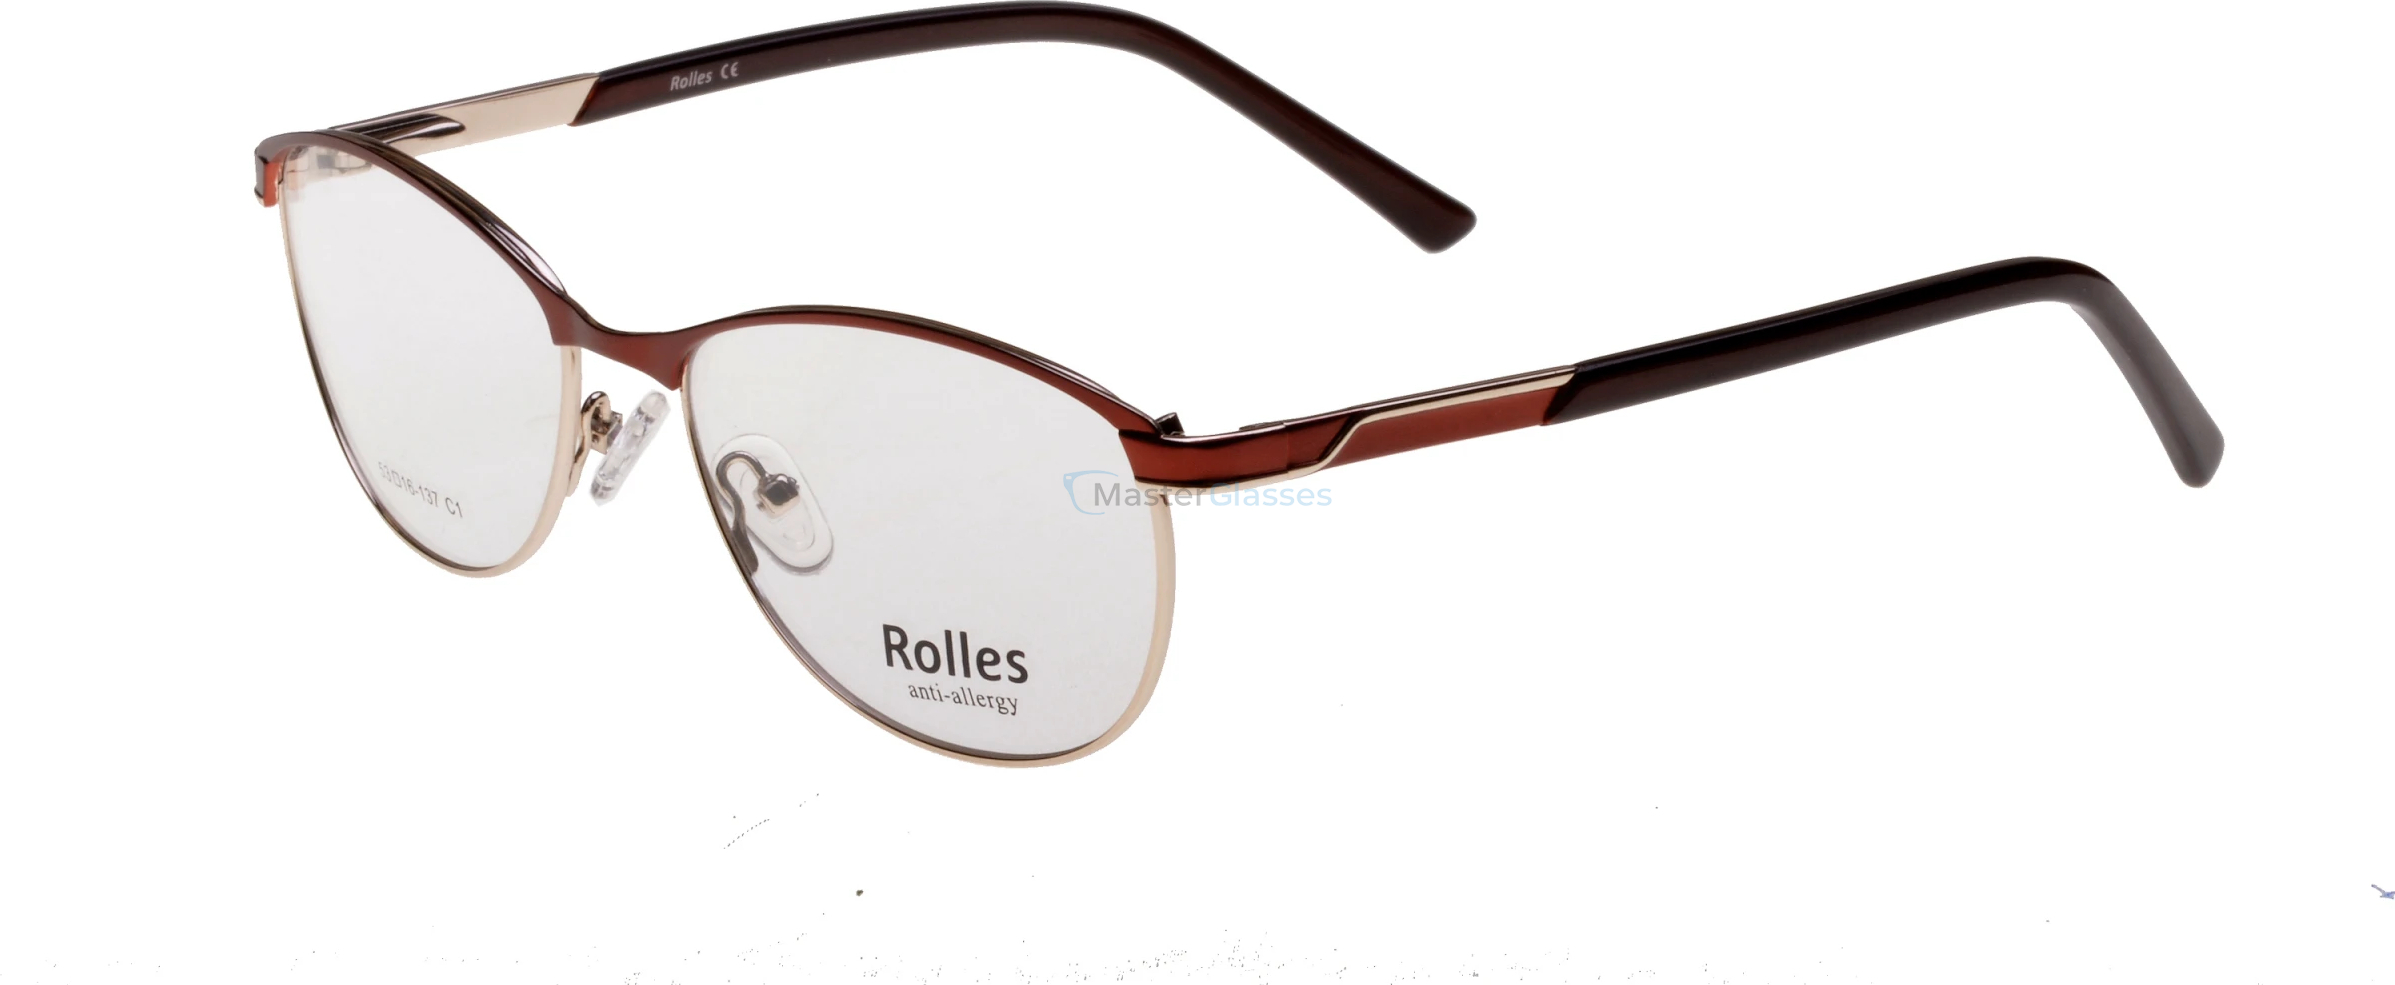  Rolles 350 01